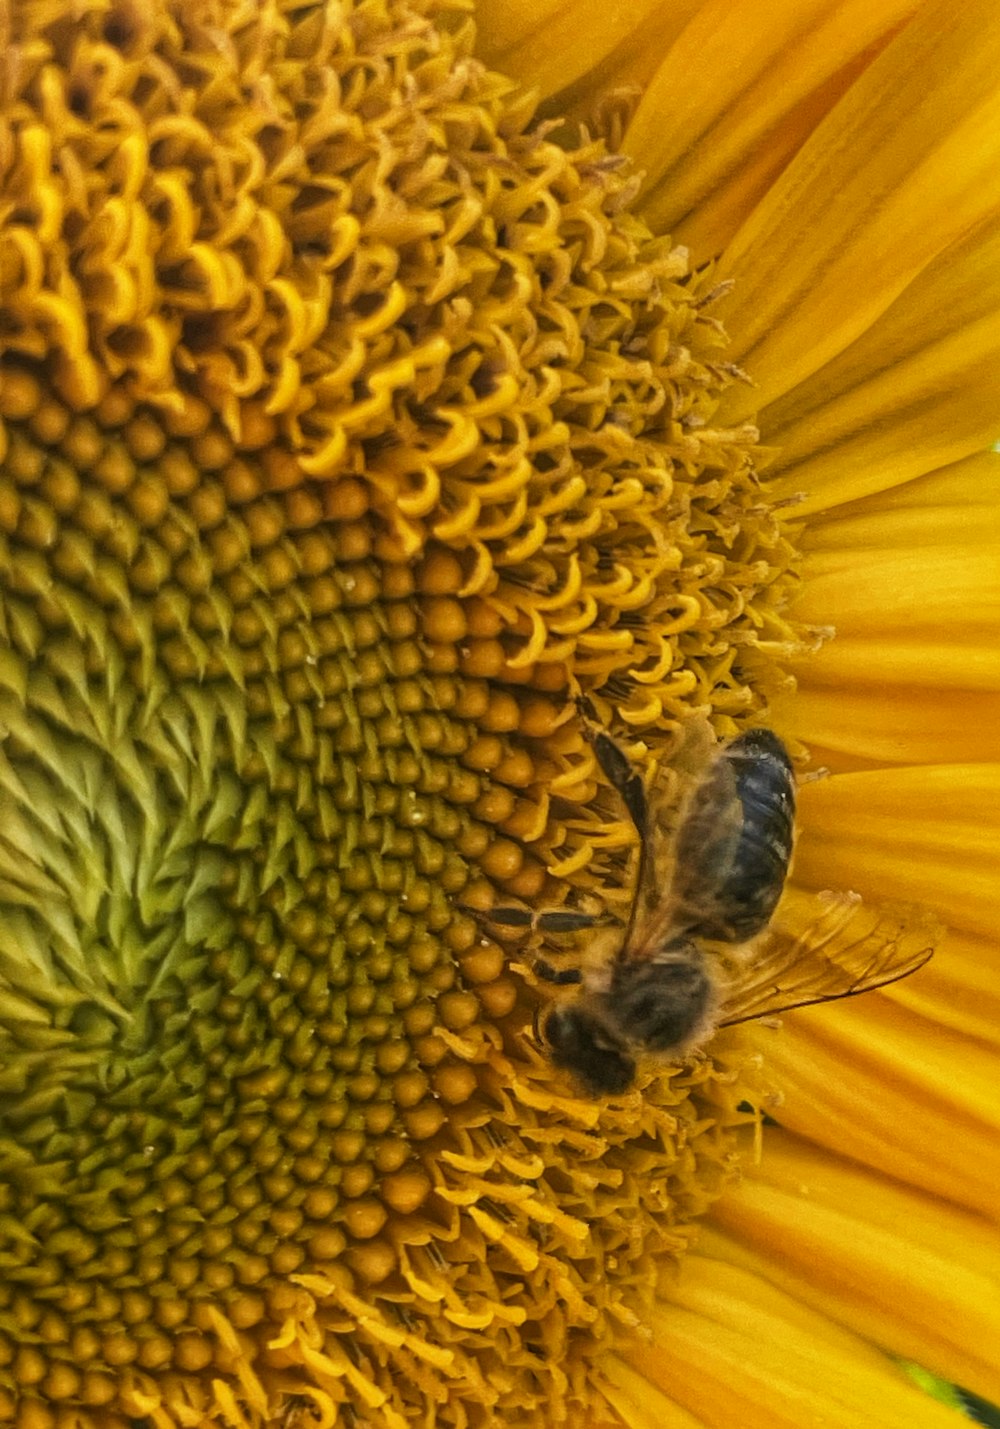 a sunflower with two bees on it